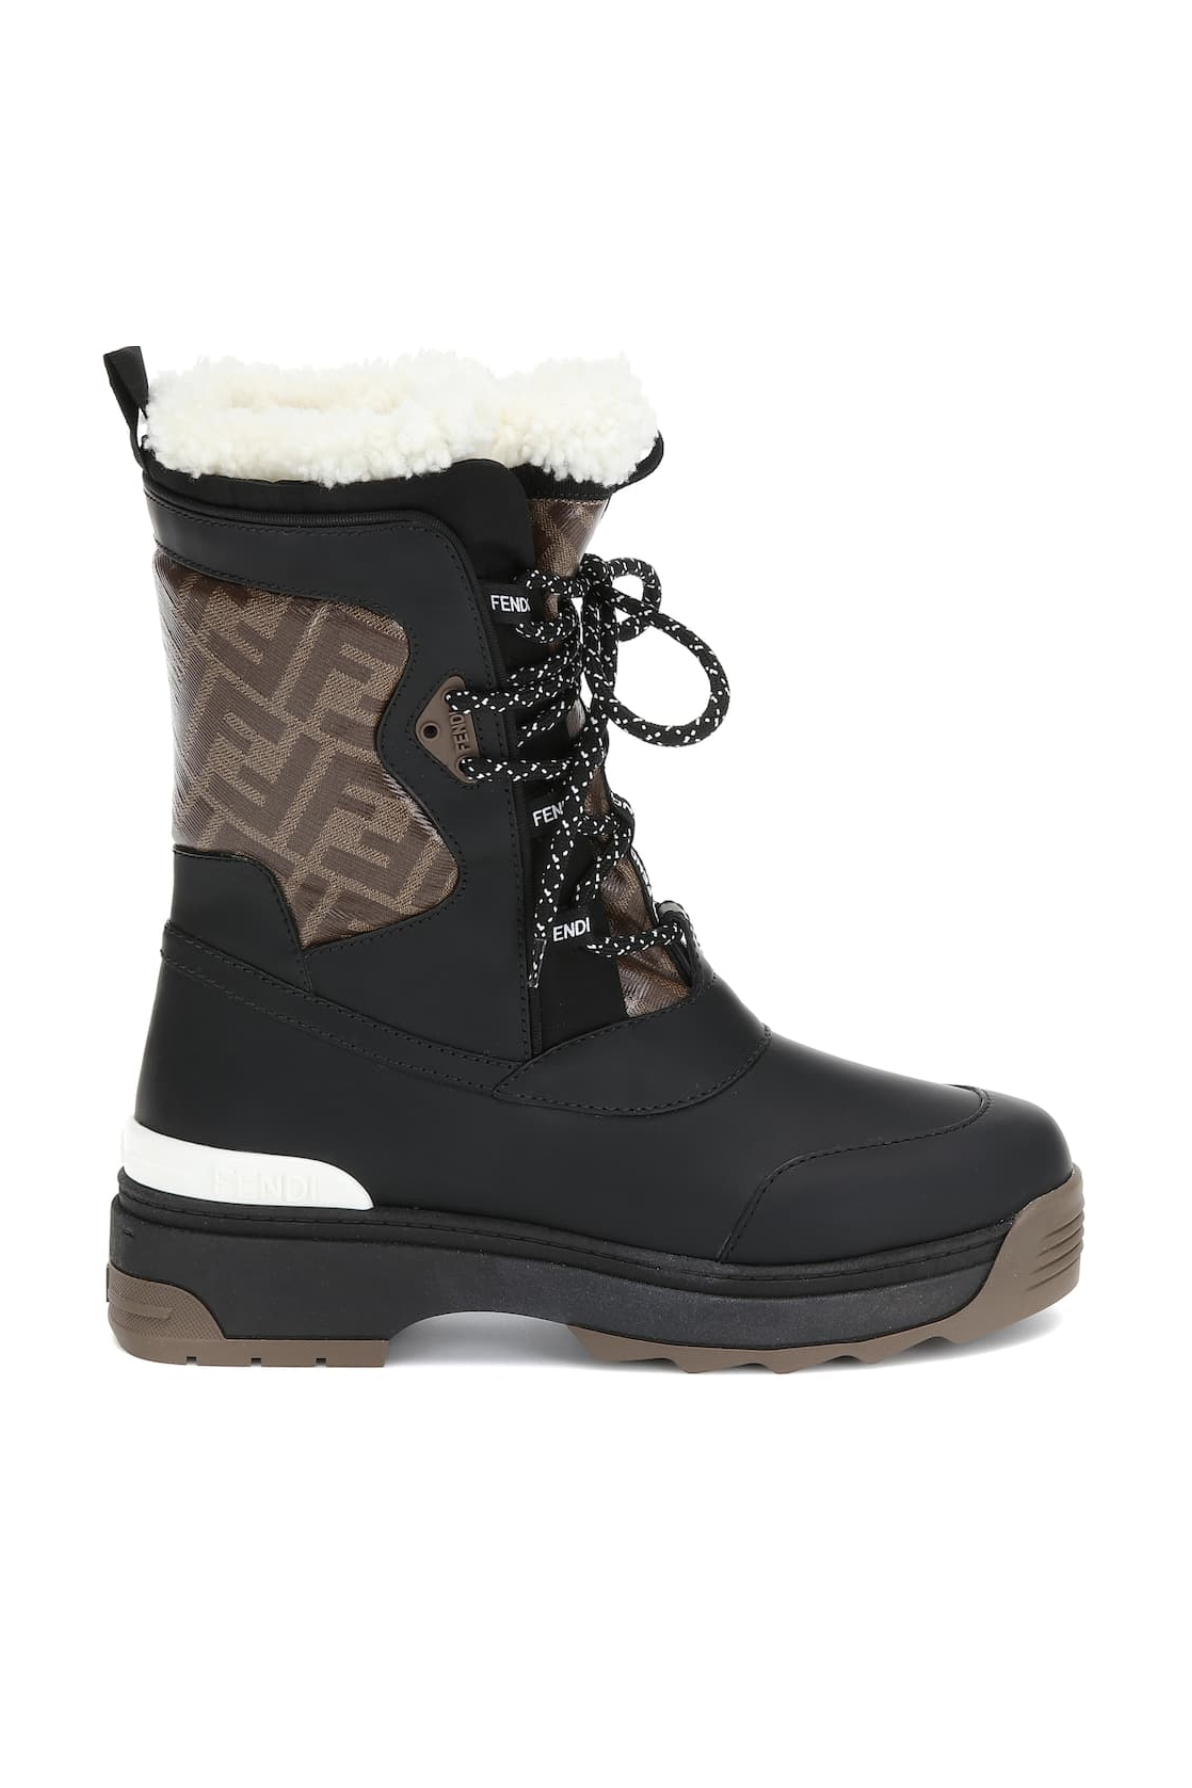 trendy womens snow boots